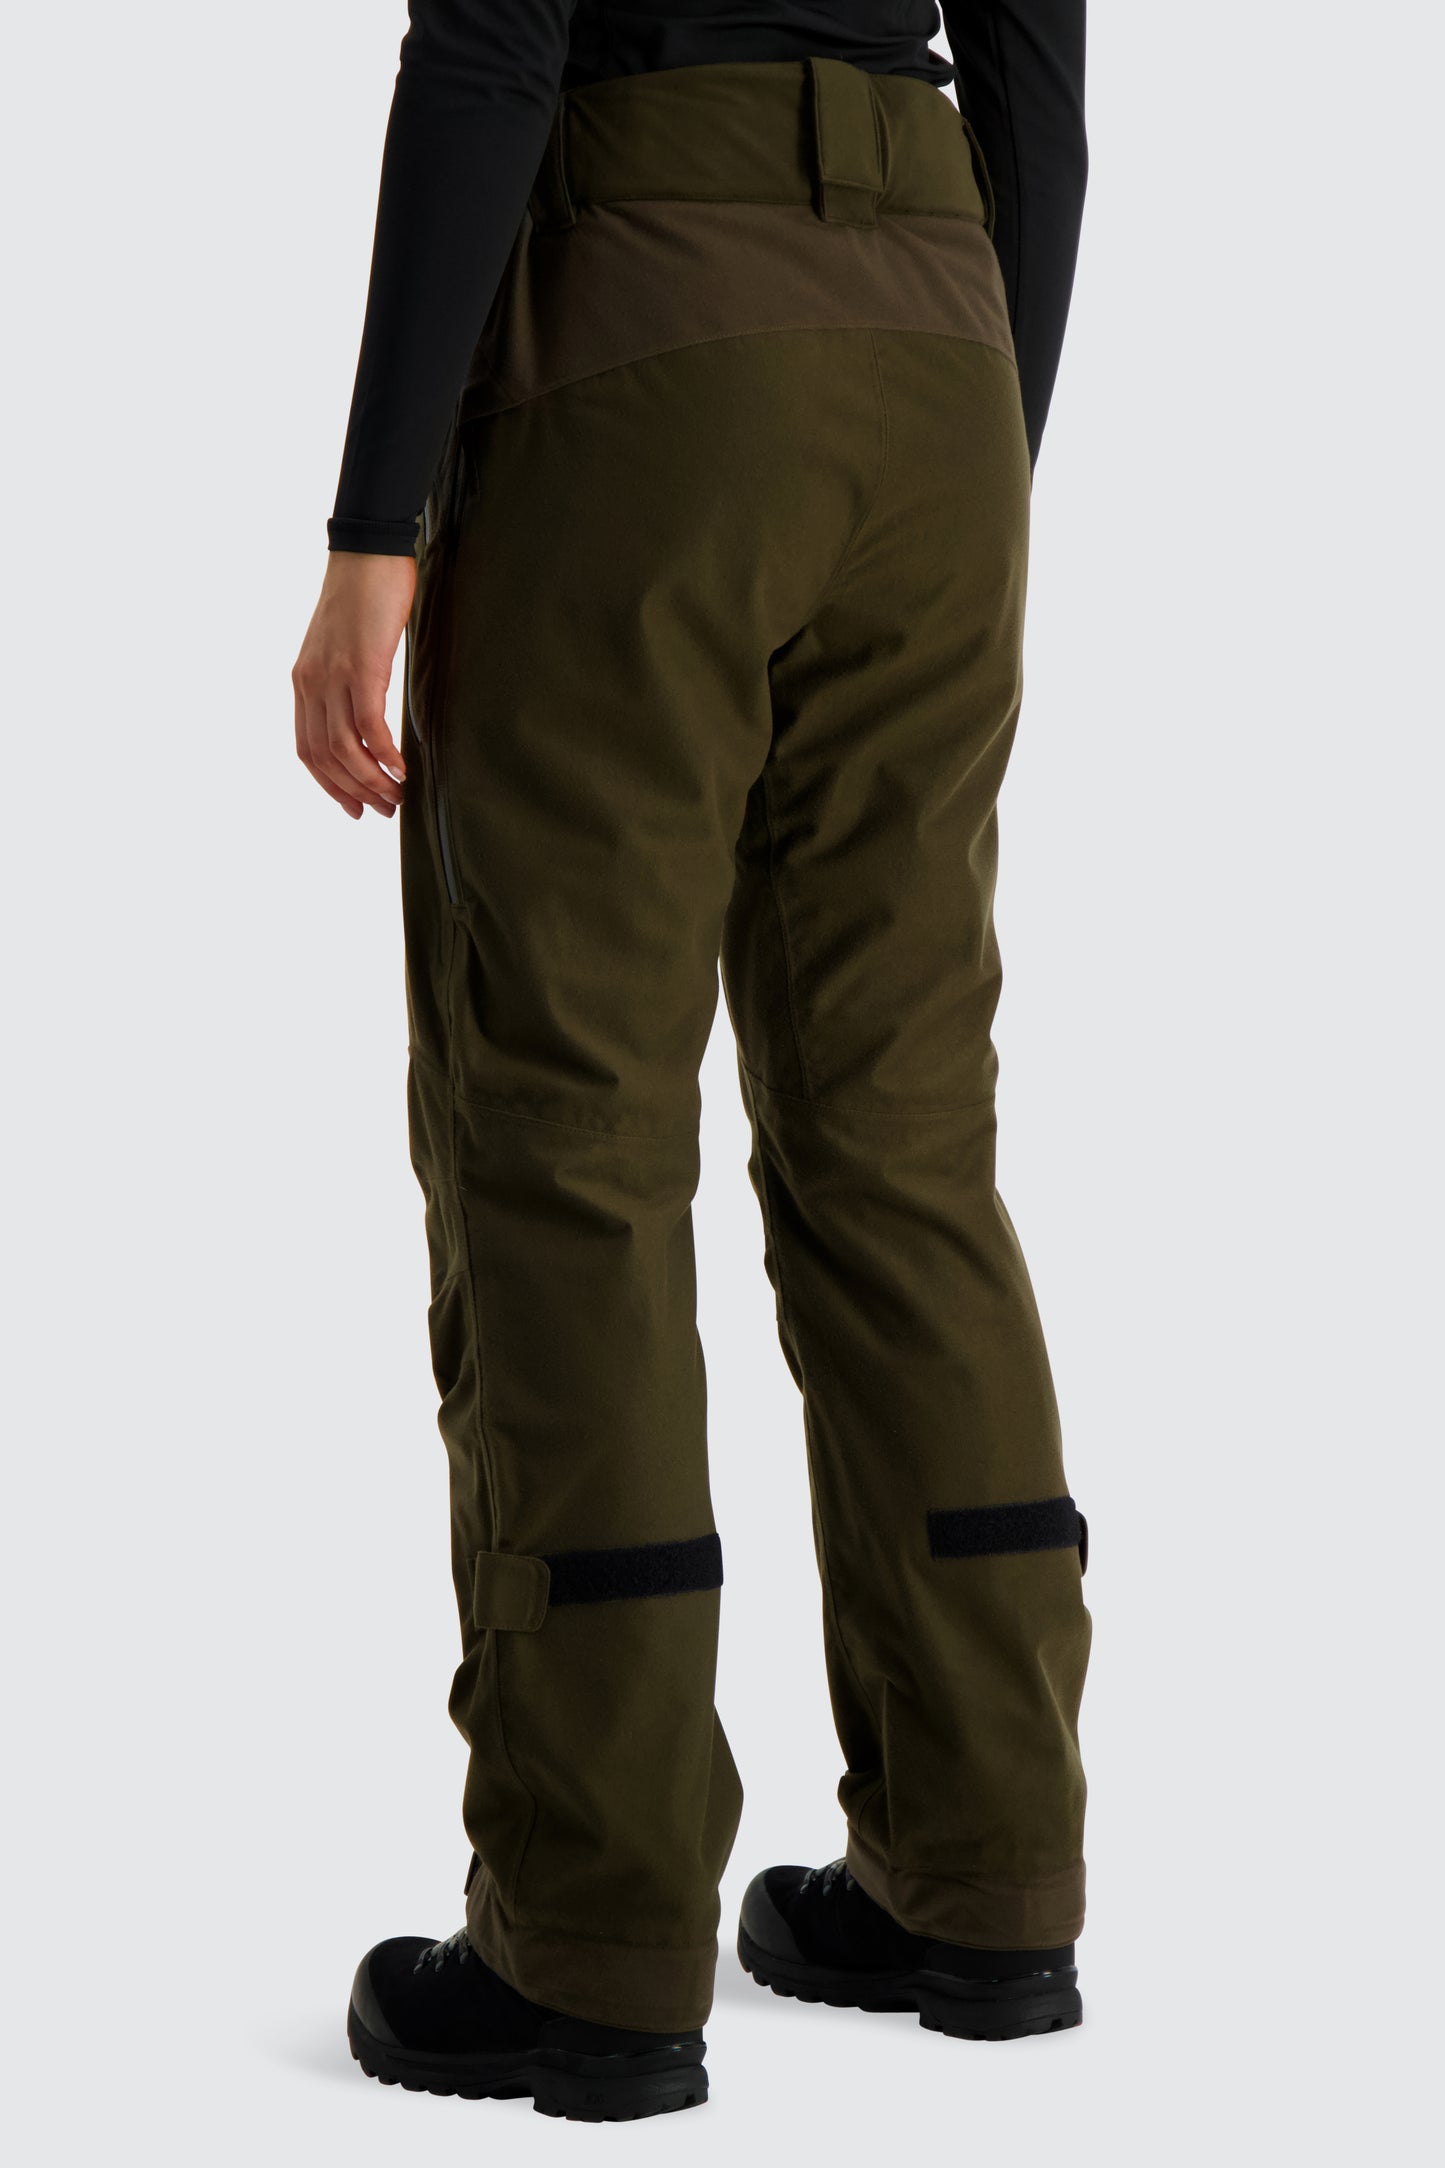 Superior II Women's Trousers, Moss Brown